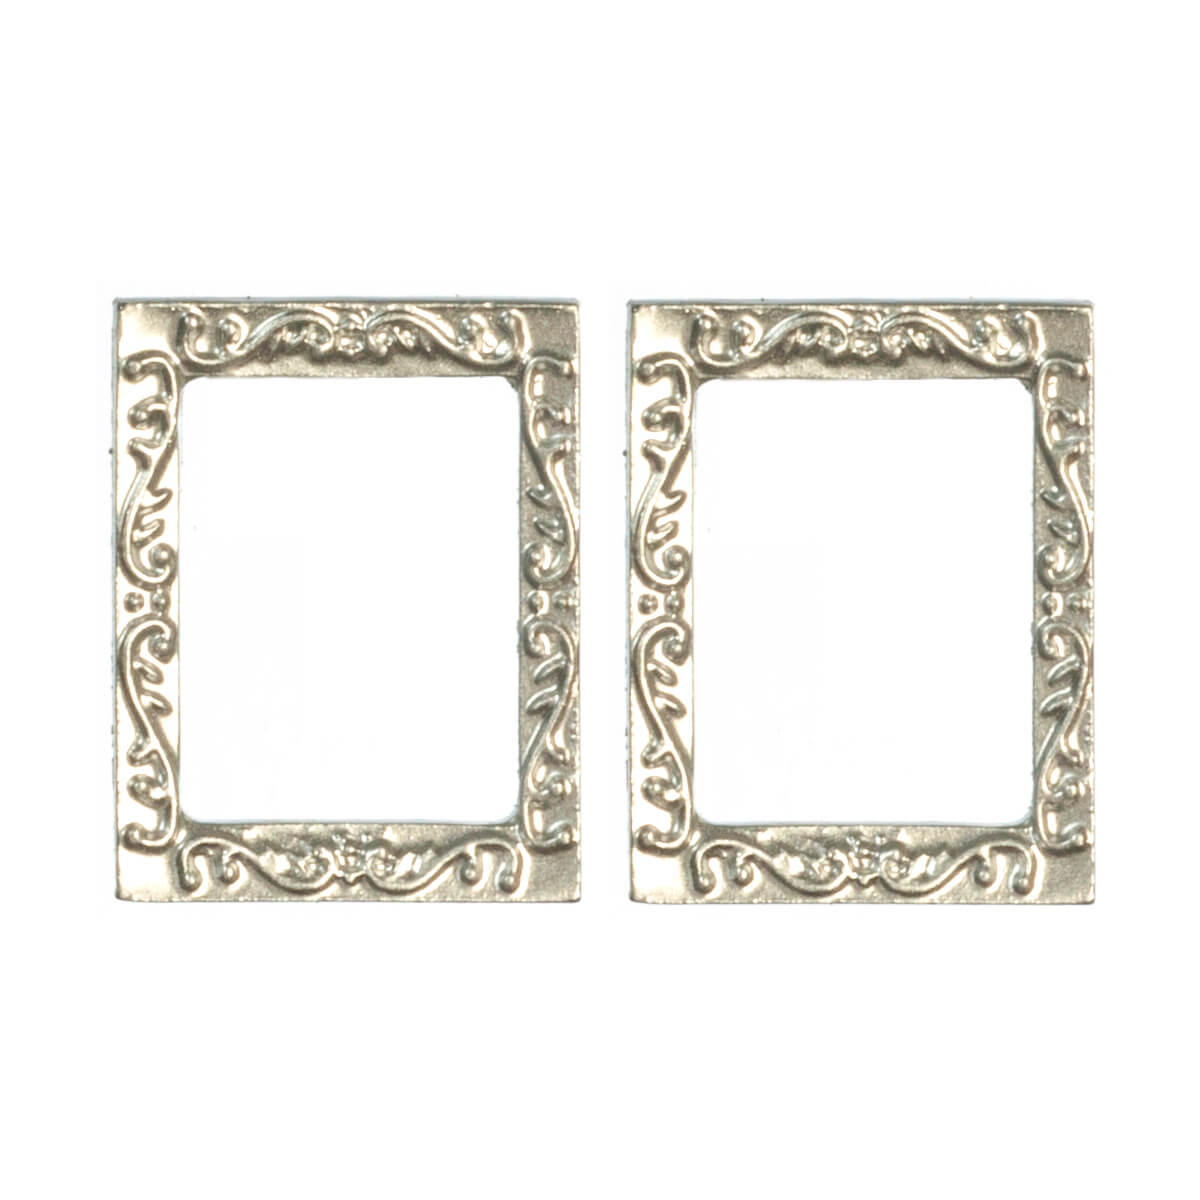 Picture Frame - Small - Silver - 2pc